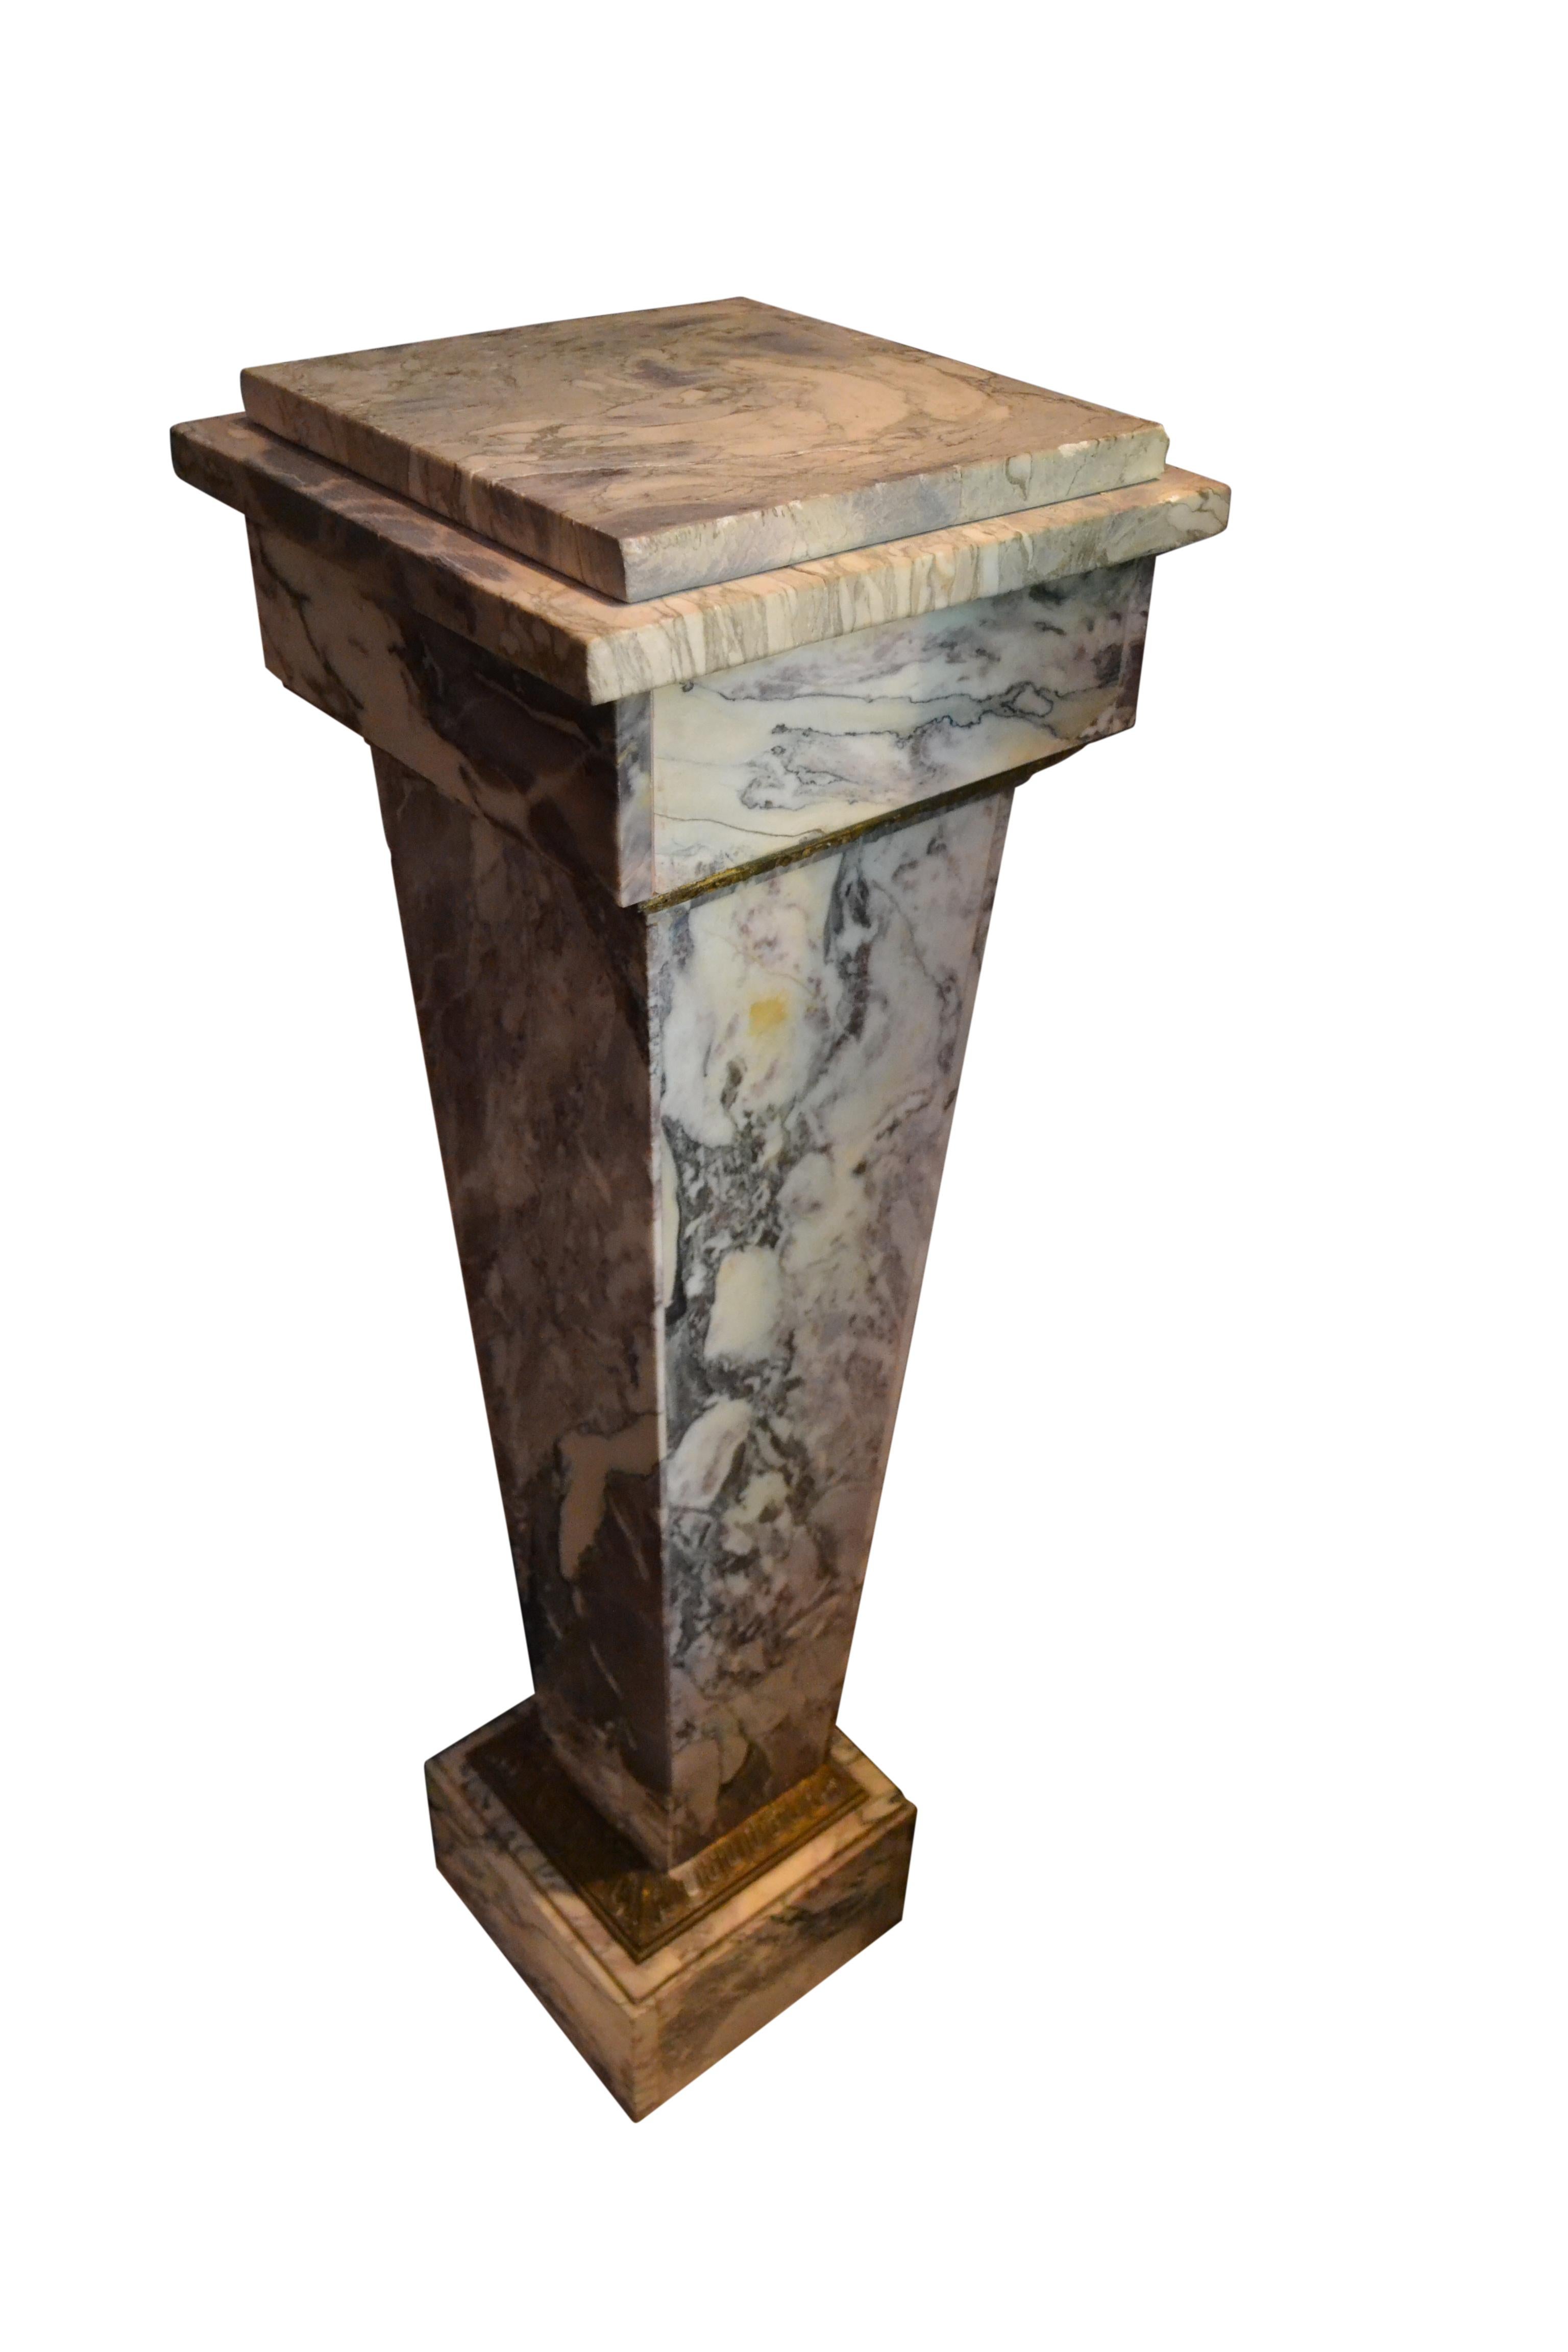 A late 19 century tapering square column made of a white flourite marble called 'Lilac'. It is heavily veined in brown and black on a white background with touches of light red/lilac colour. Below the rectangular top there is a gilt bronze banding